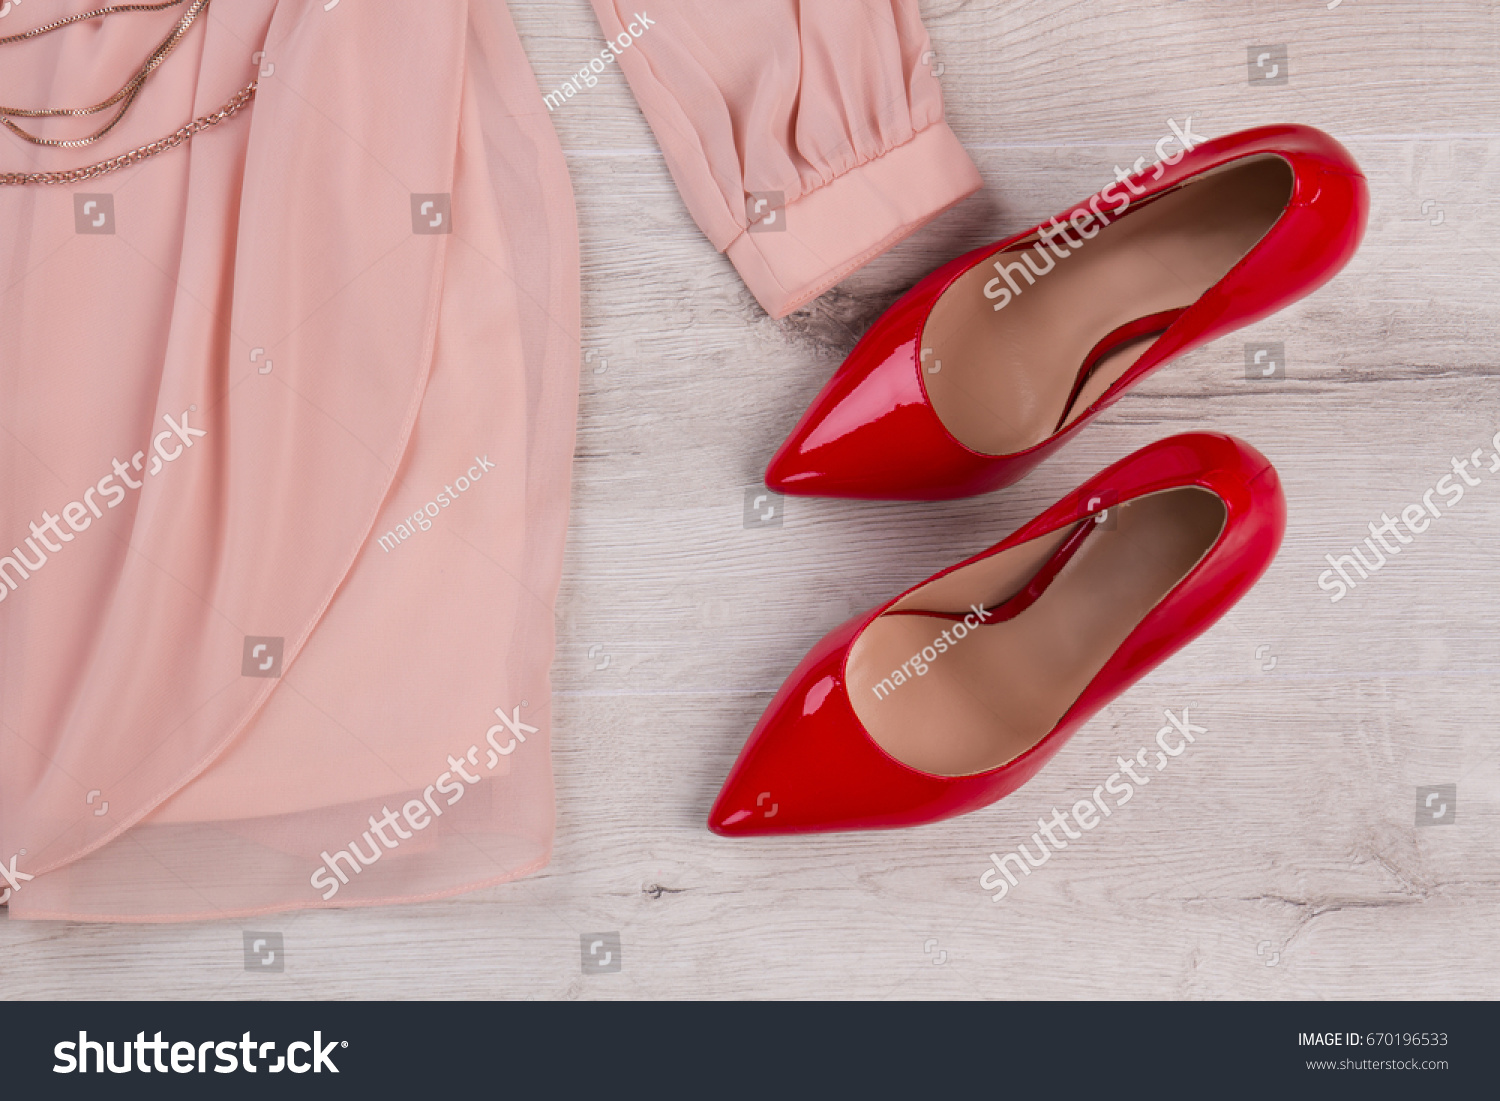 pink dress and red shoes